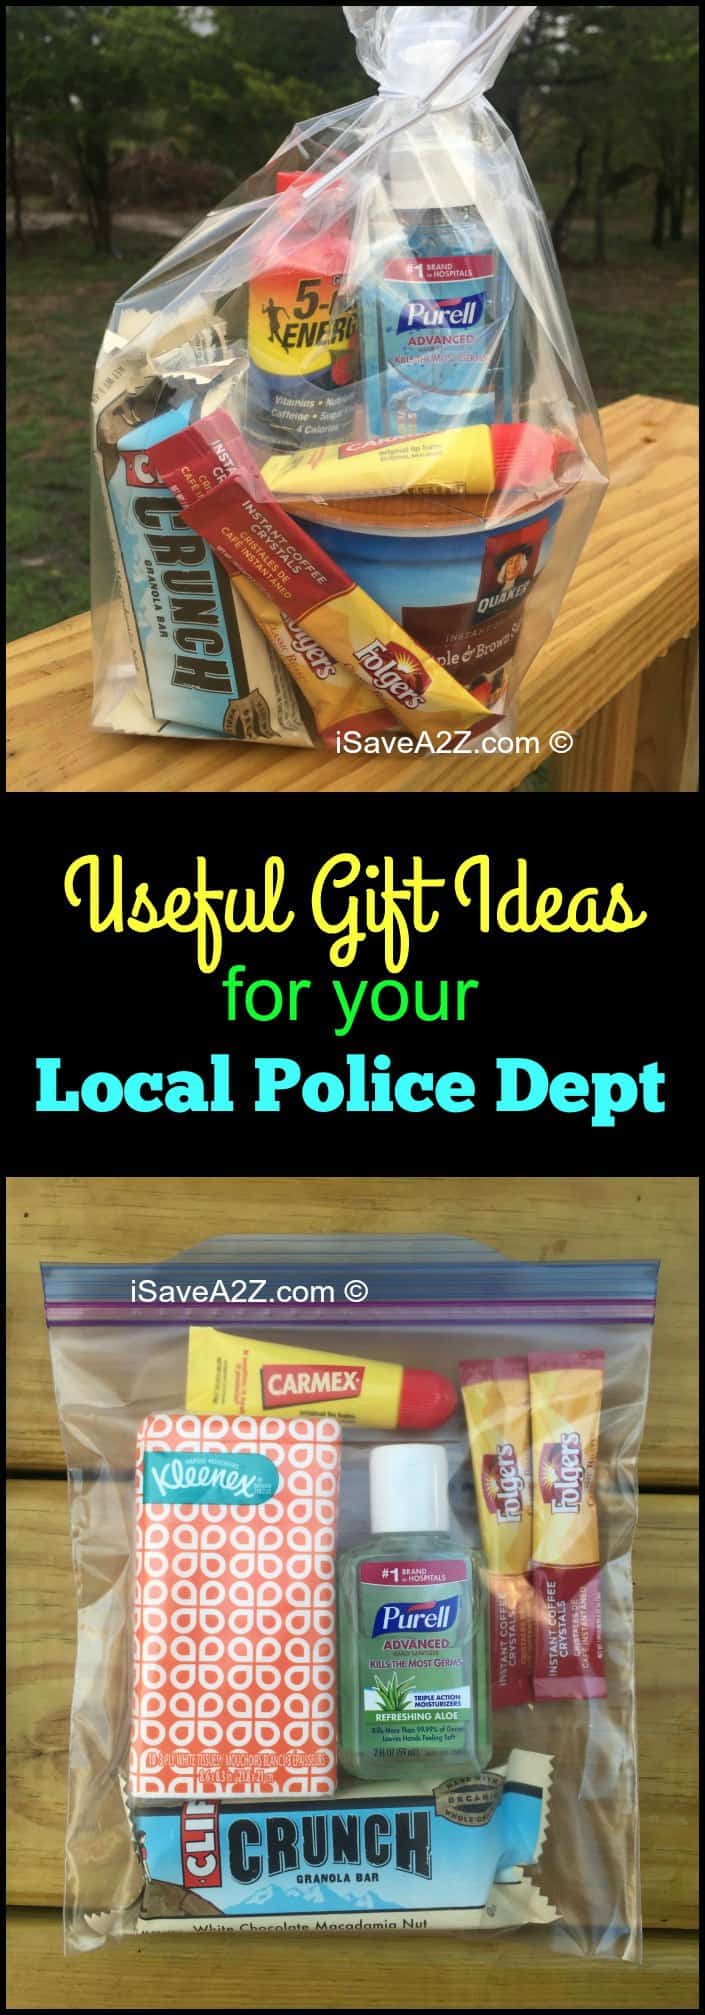 Small Appreciation Gift Ideas for your Local Police Department -  iSaveA2Z.com